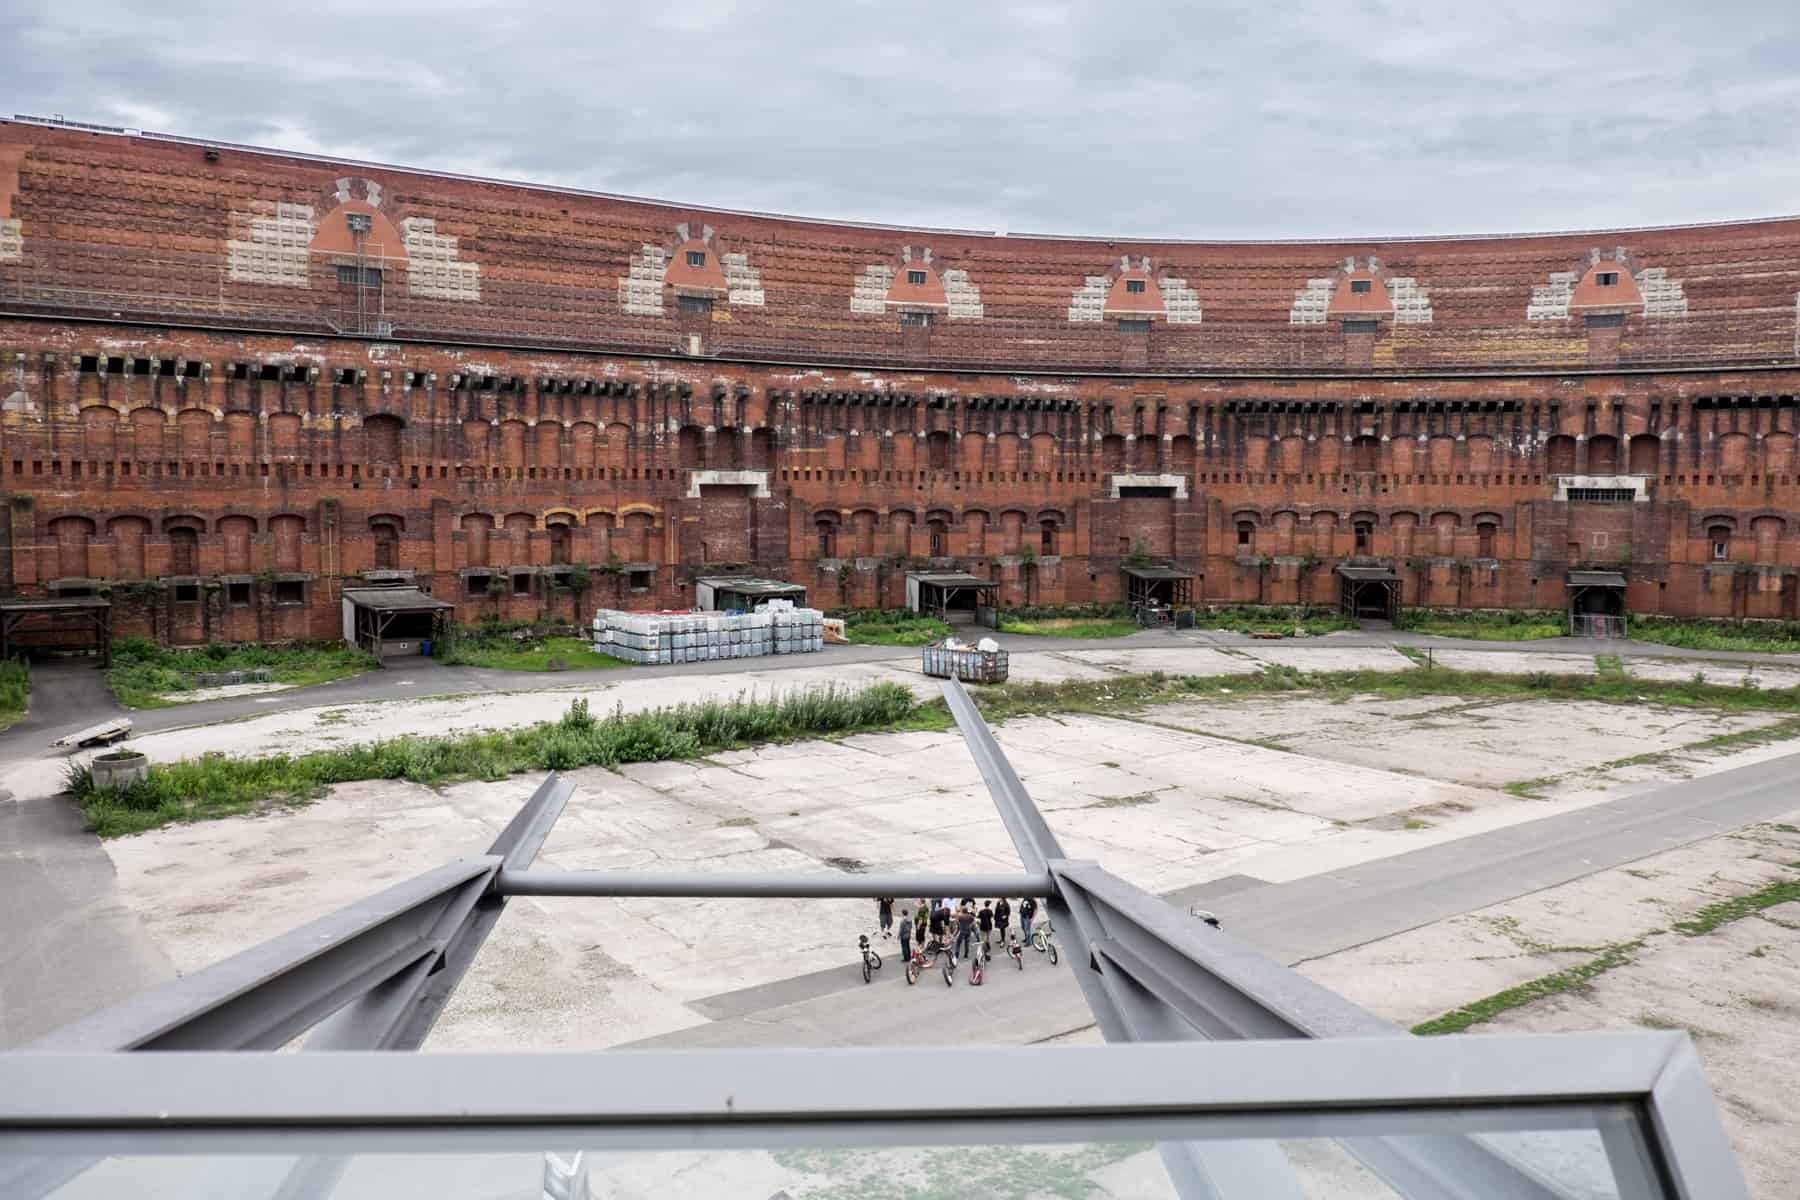 View of the red brick courtyard of the for Nazi Congress Hall as seen from the viewing platform in the Nuremberg Documentation Centre